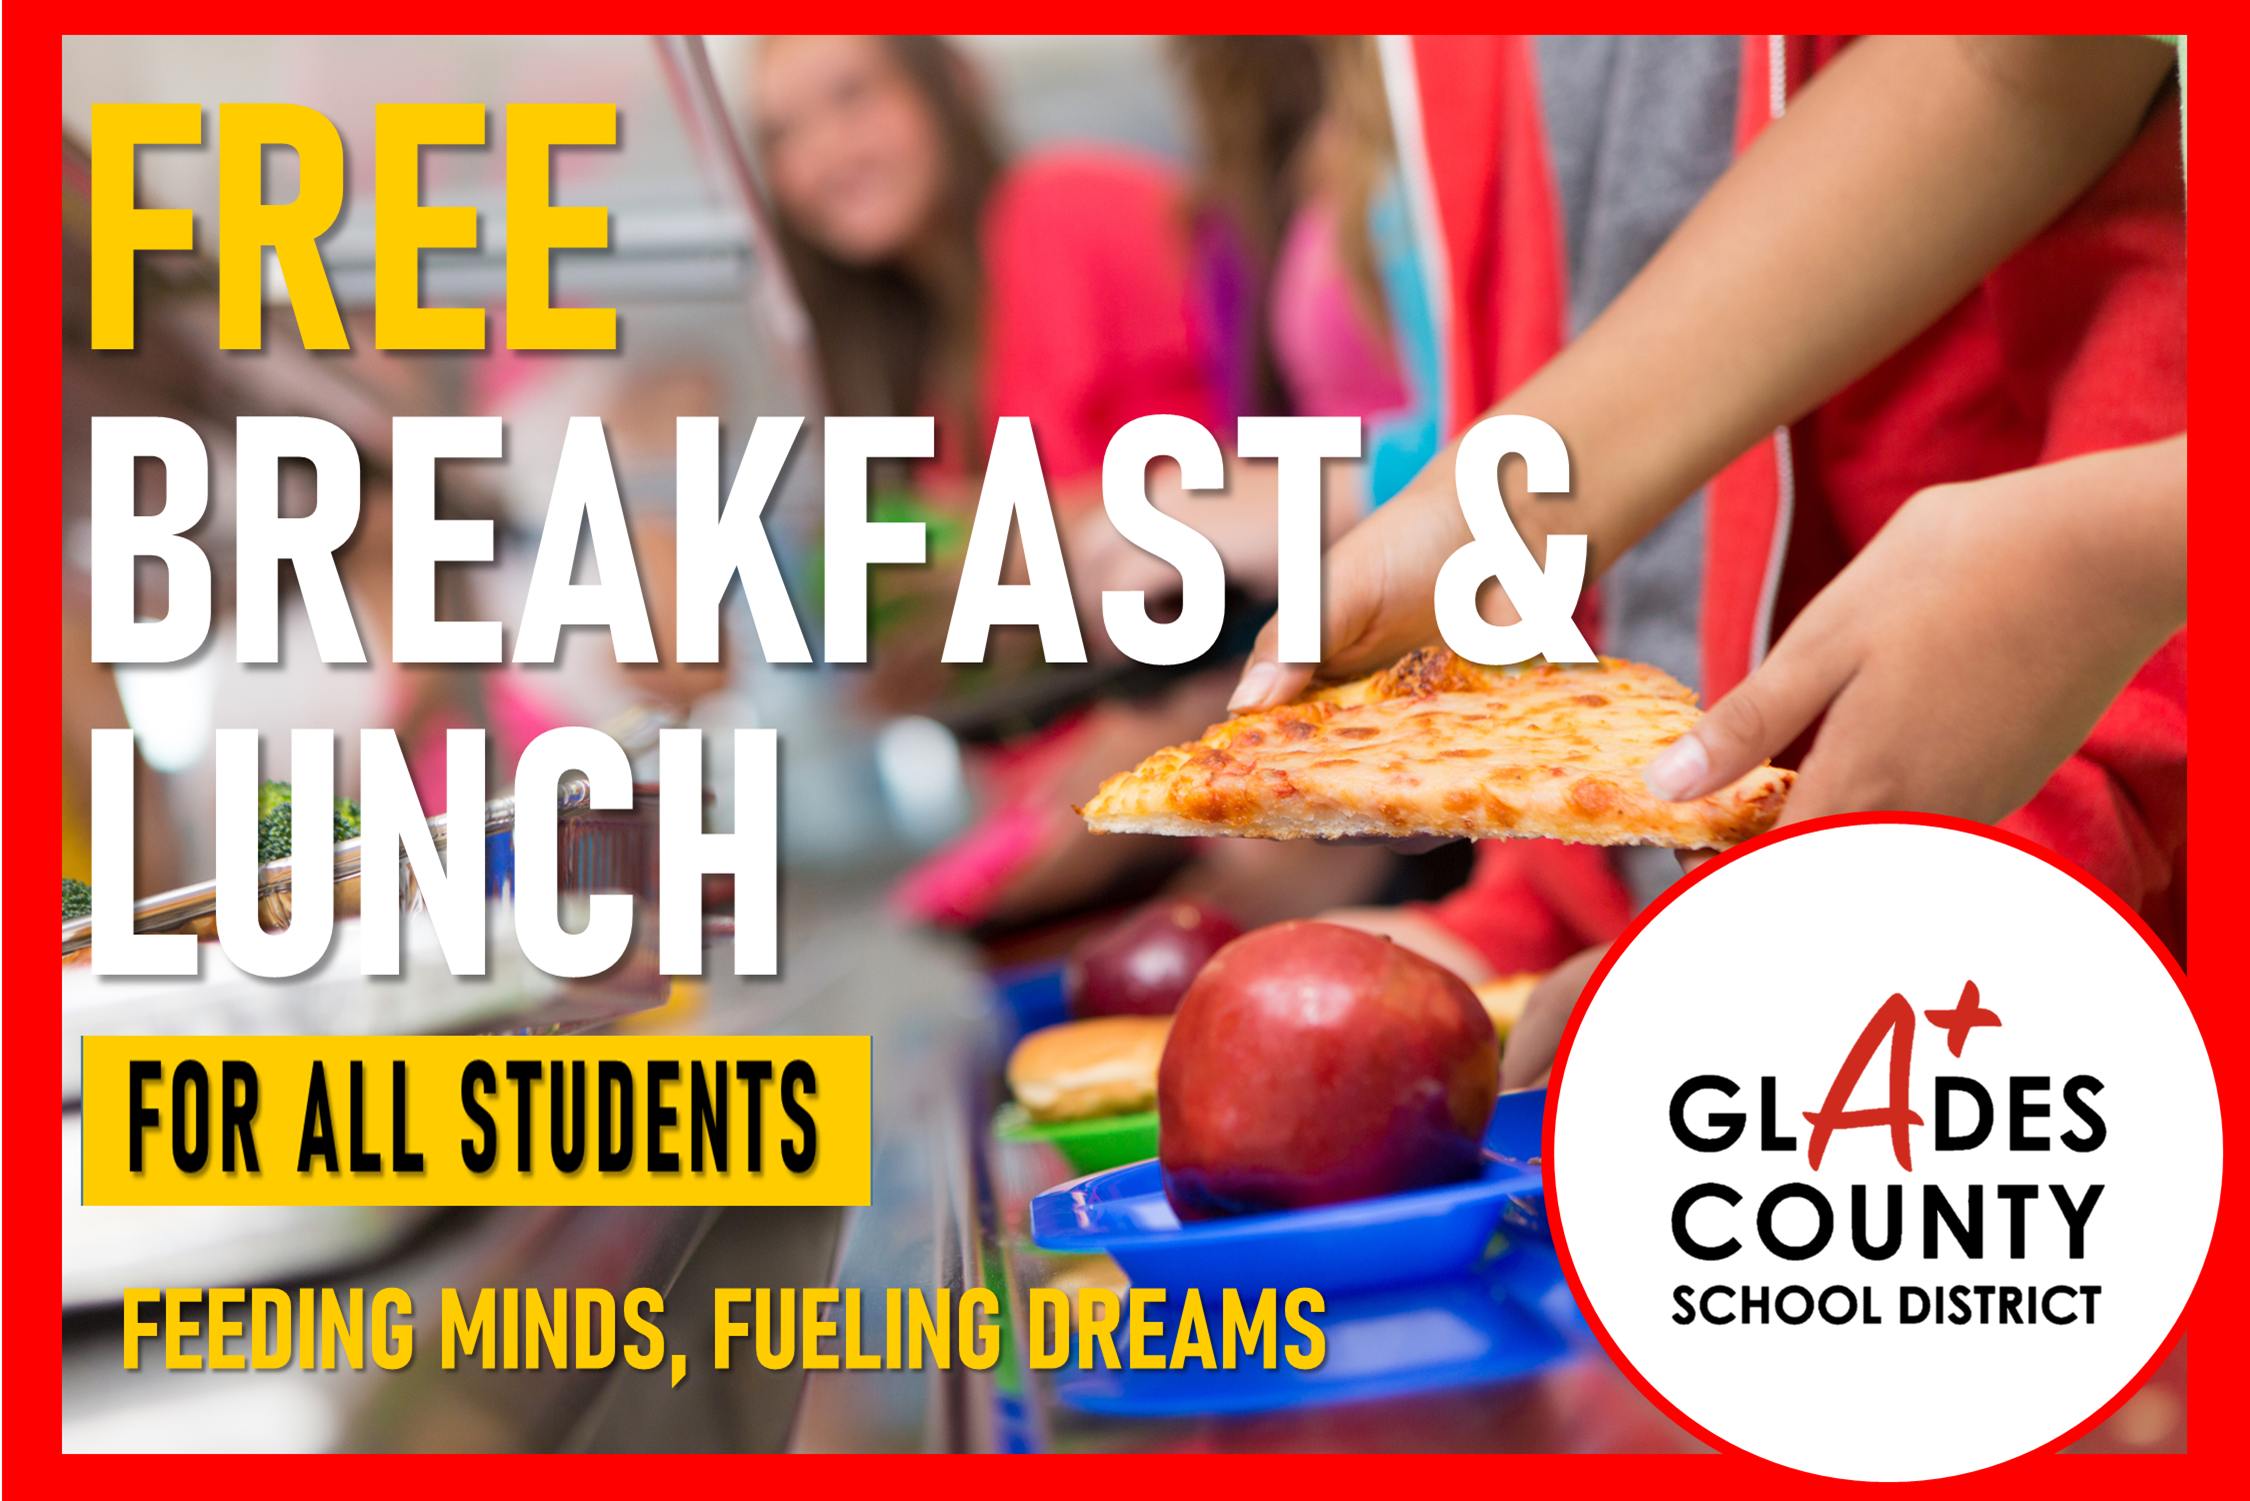 students in line for lunch pictured on a flyer for free lunch and breakfast for all students